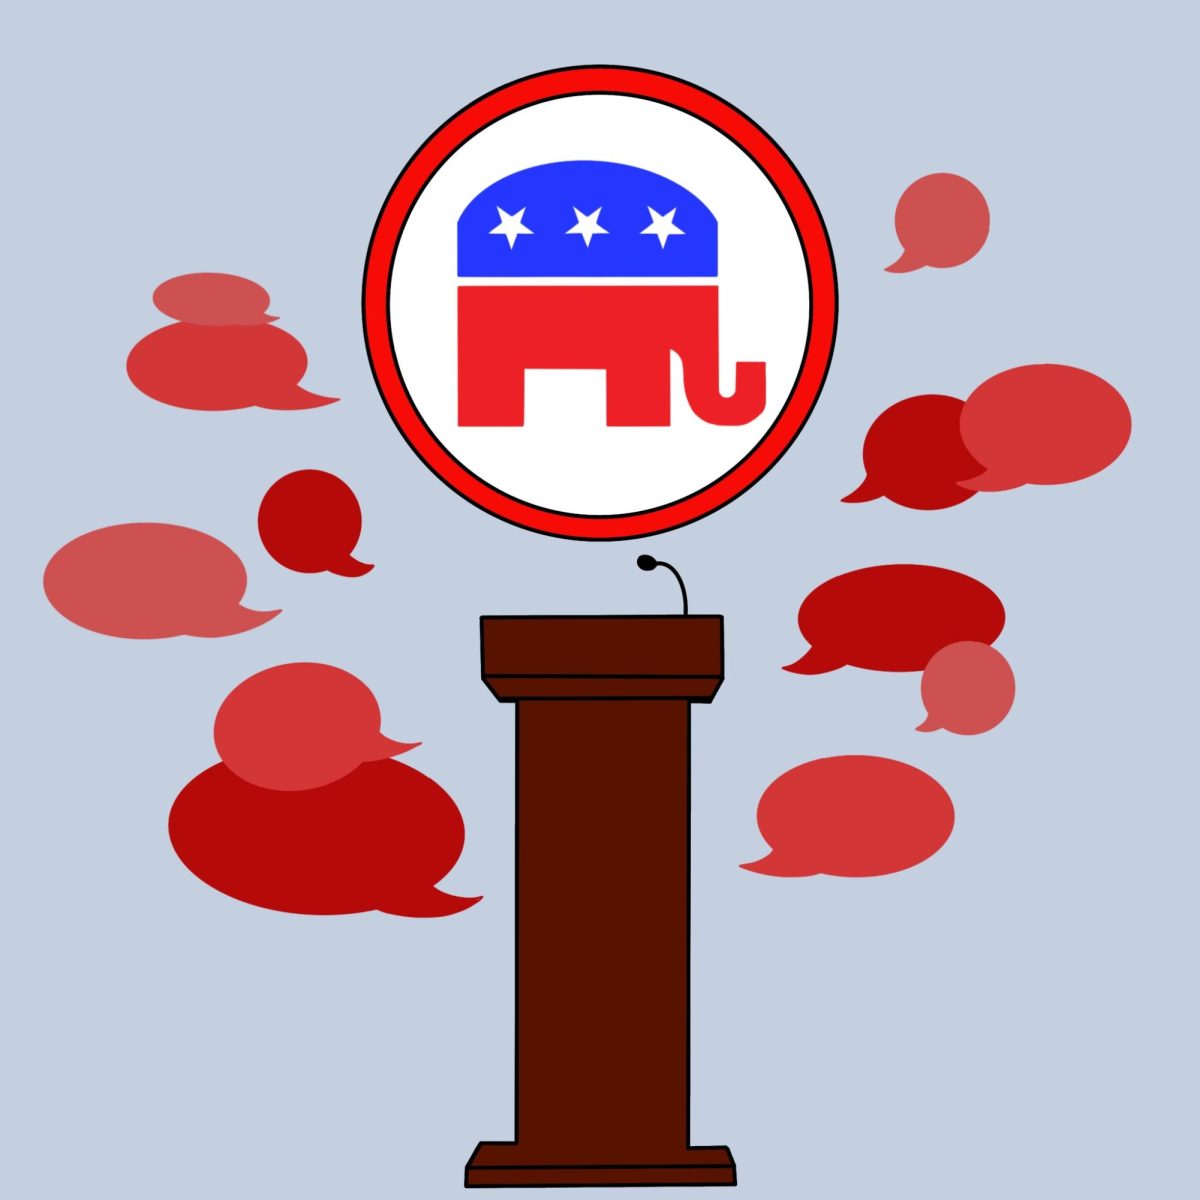 Eight+Republican+candidates+presented+their+platforms+and+stances+at+the+first+GOP+primary+debate+on+Aug.+23.